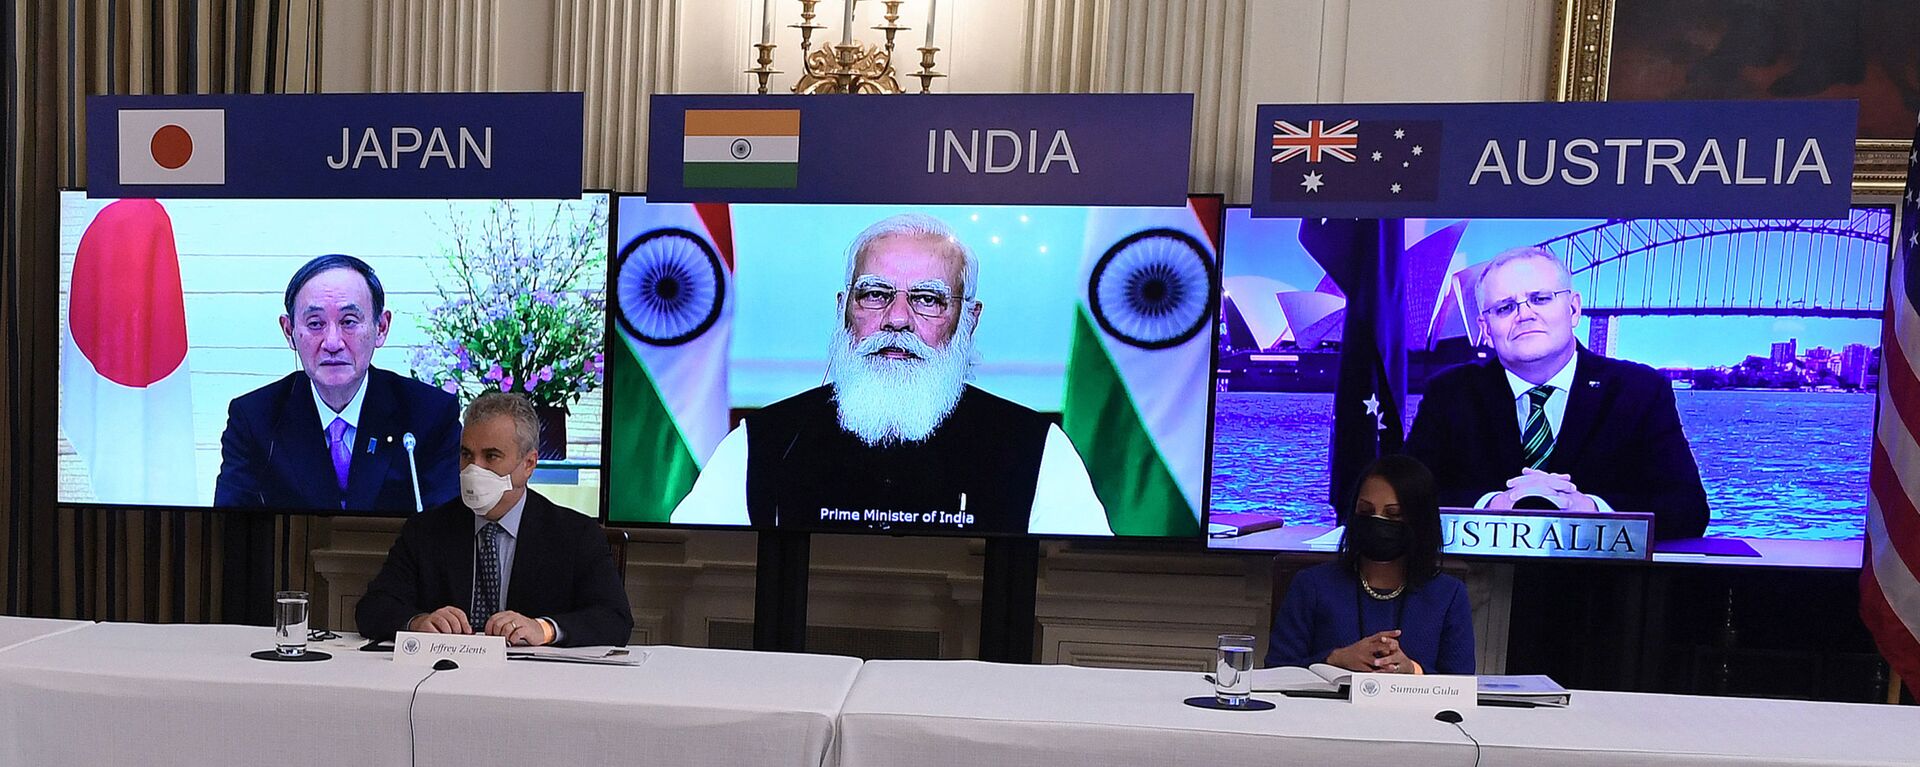 (On screens, L-R) Japanese Prime Minister Yoshihide Suga, Indian Prime Minister Narendra Modi and Australian Prime Minister Scott Morrison listen during a virtual meeting of the Quad alliance members: Australia, India, Japan and the US, in the State Dining Room of the White House in Washington, DC, on March 12, 2021. - Sputnik International, 1920, 22.04.2021